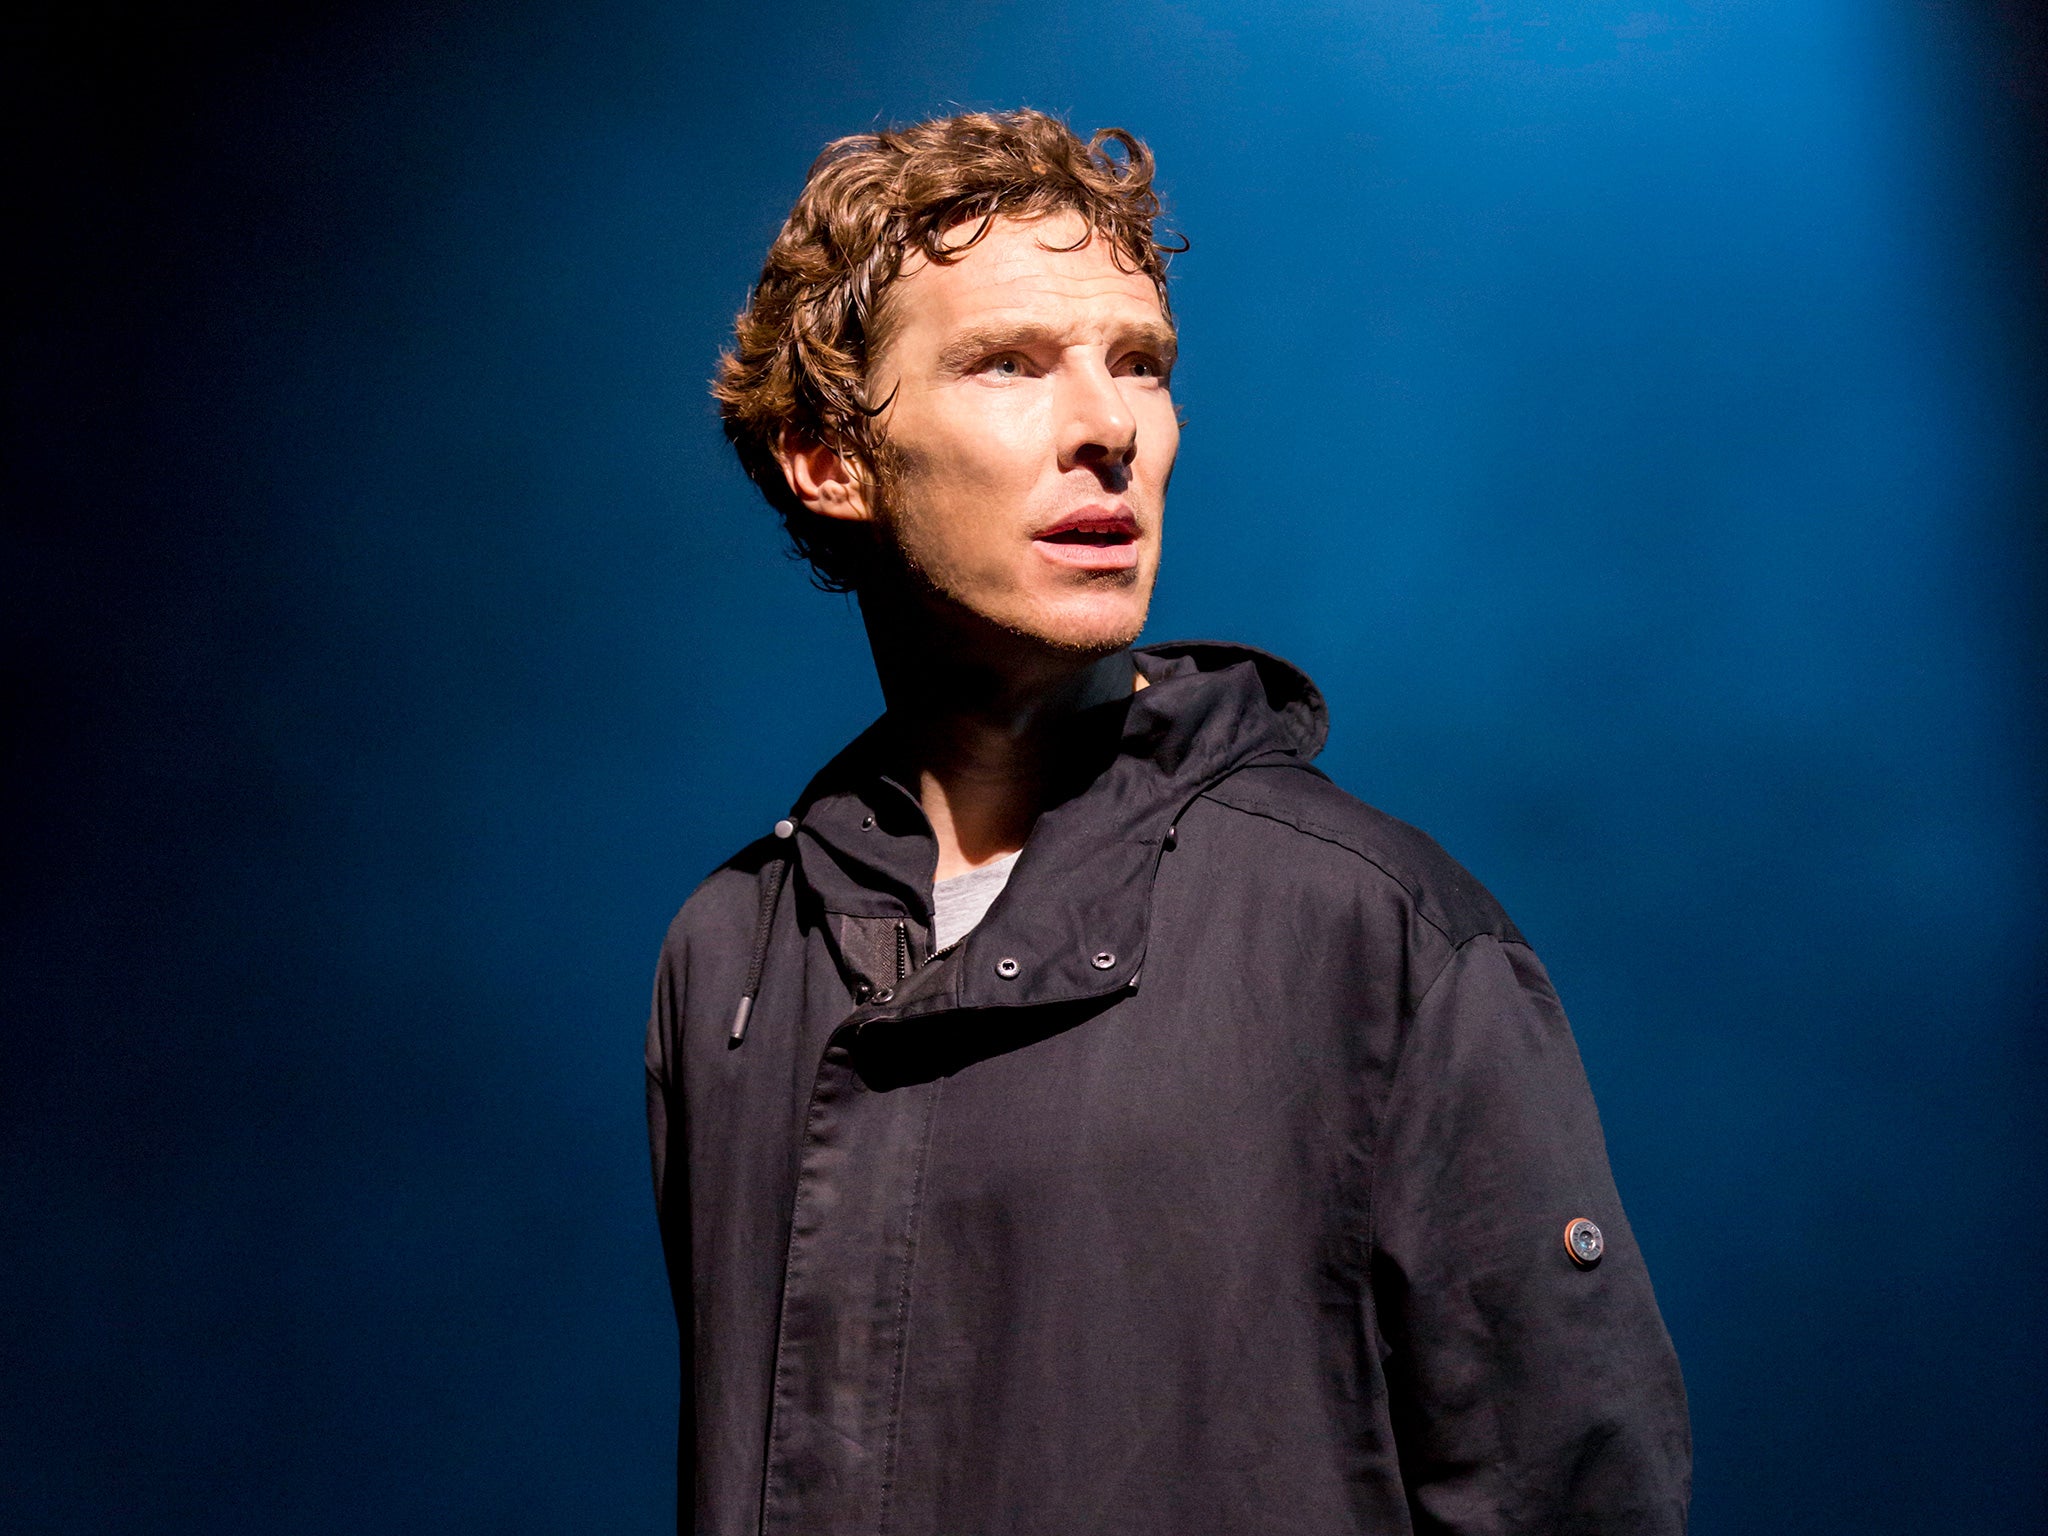 Benedict Cumberbatch fans are known for their vociferous presence on Twitter